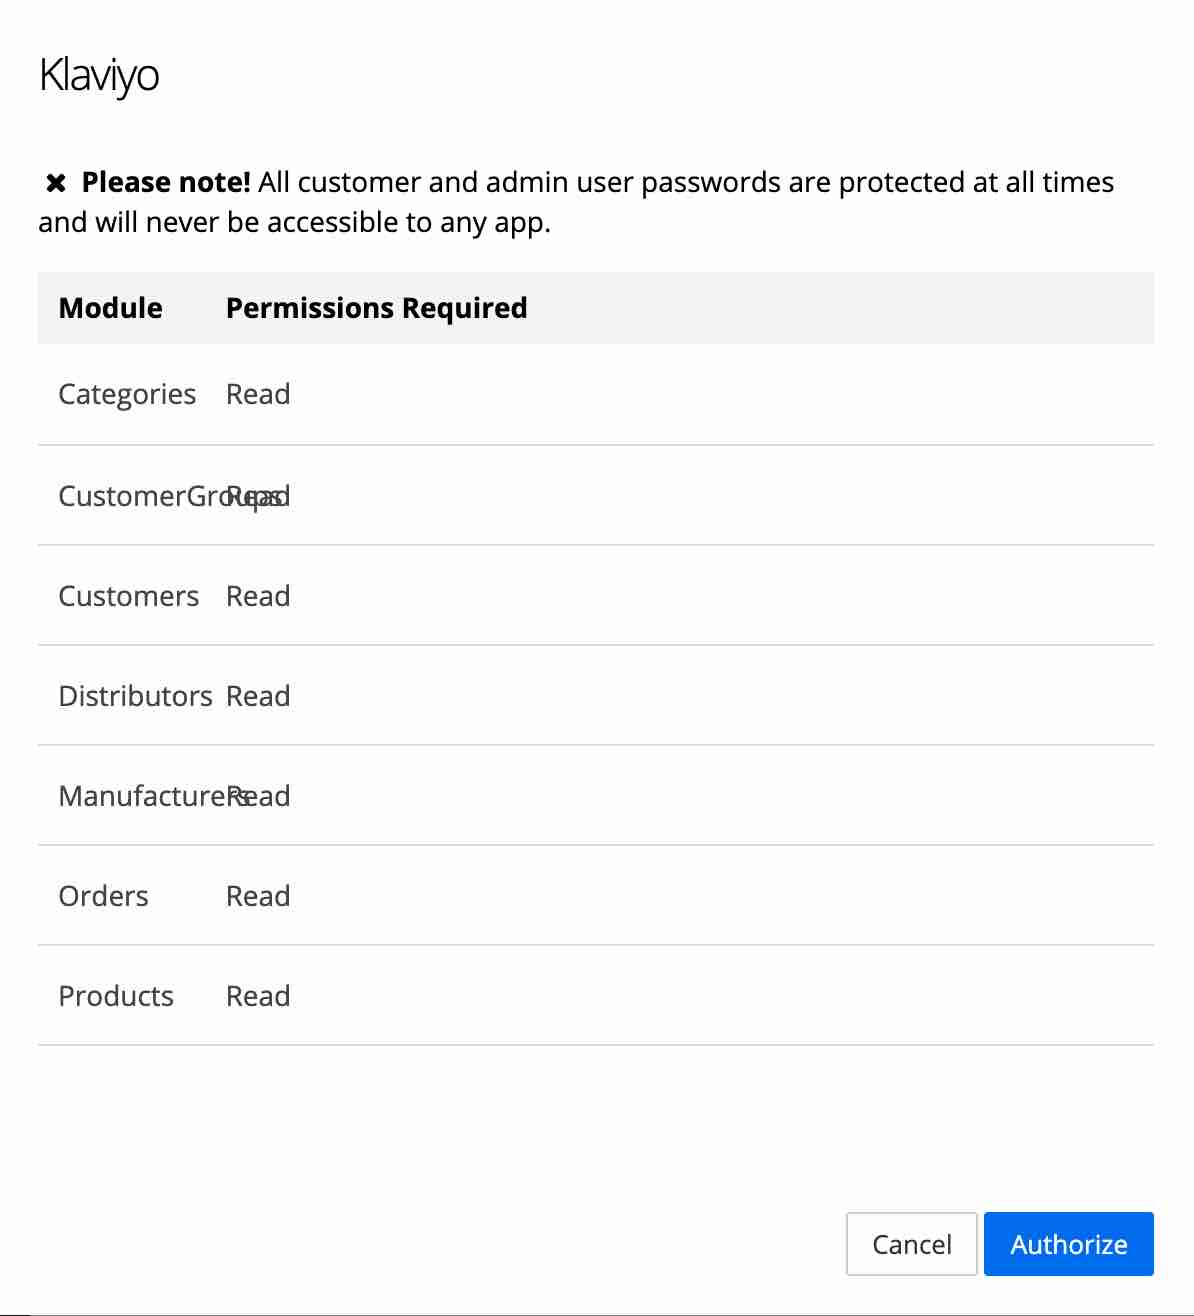 Klaviyo settings in Shift4Shop showing required permissions with Authorize button with blue background